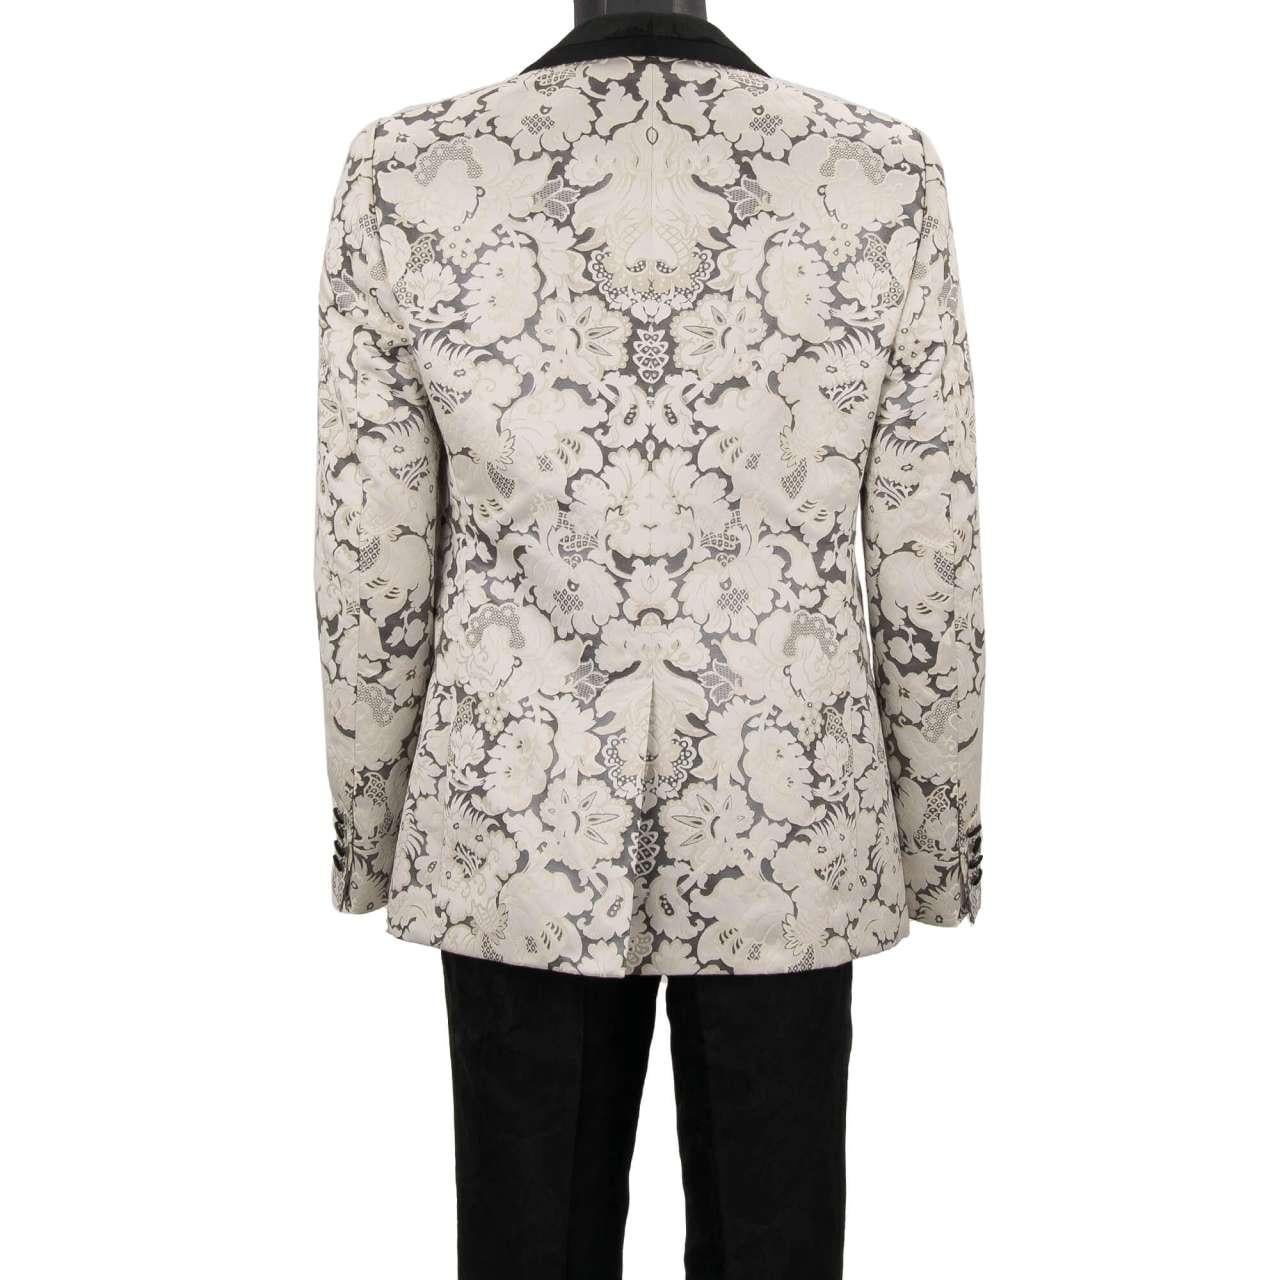 - Baroque jacquard 3 piece suit, jacket, waistcoat, pants with shawl lapel in white and black by DOLCE & GABBANA - MARTINI Model - RUNWAY - Dolce & Gabbana Fashion Show - New with tag - Former RRP: EUR 3,450 - MADE in ITALY - Slim Fit - Model: